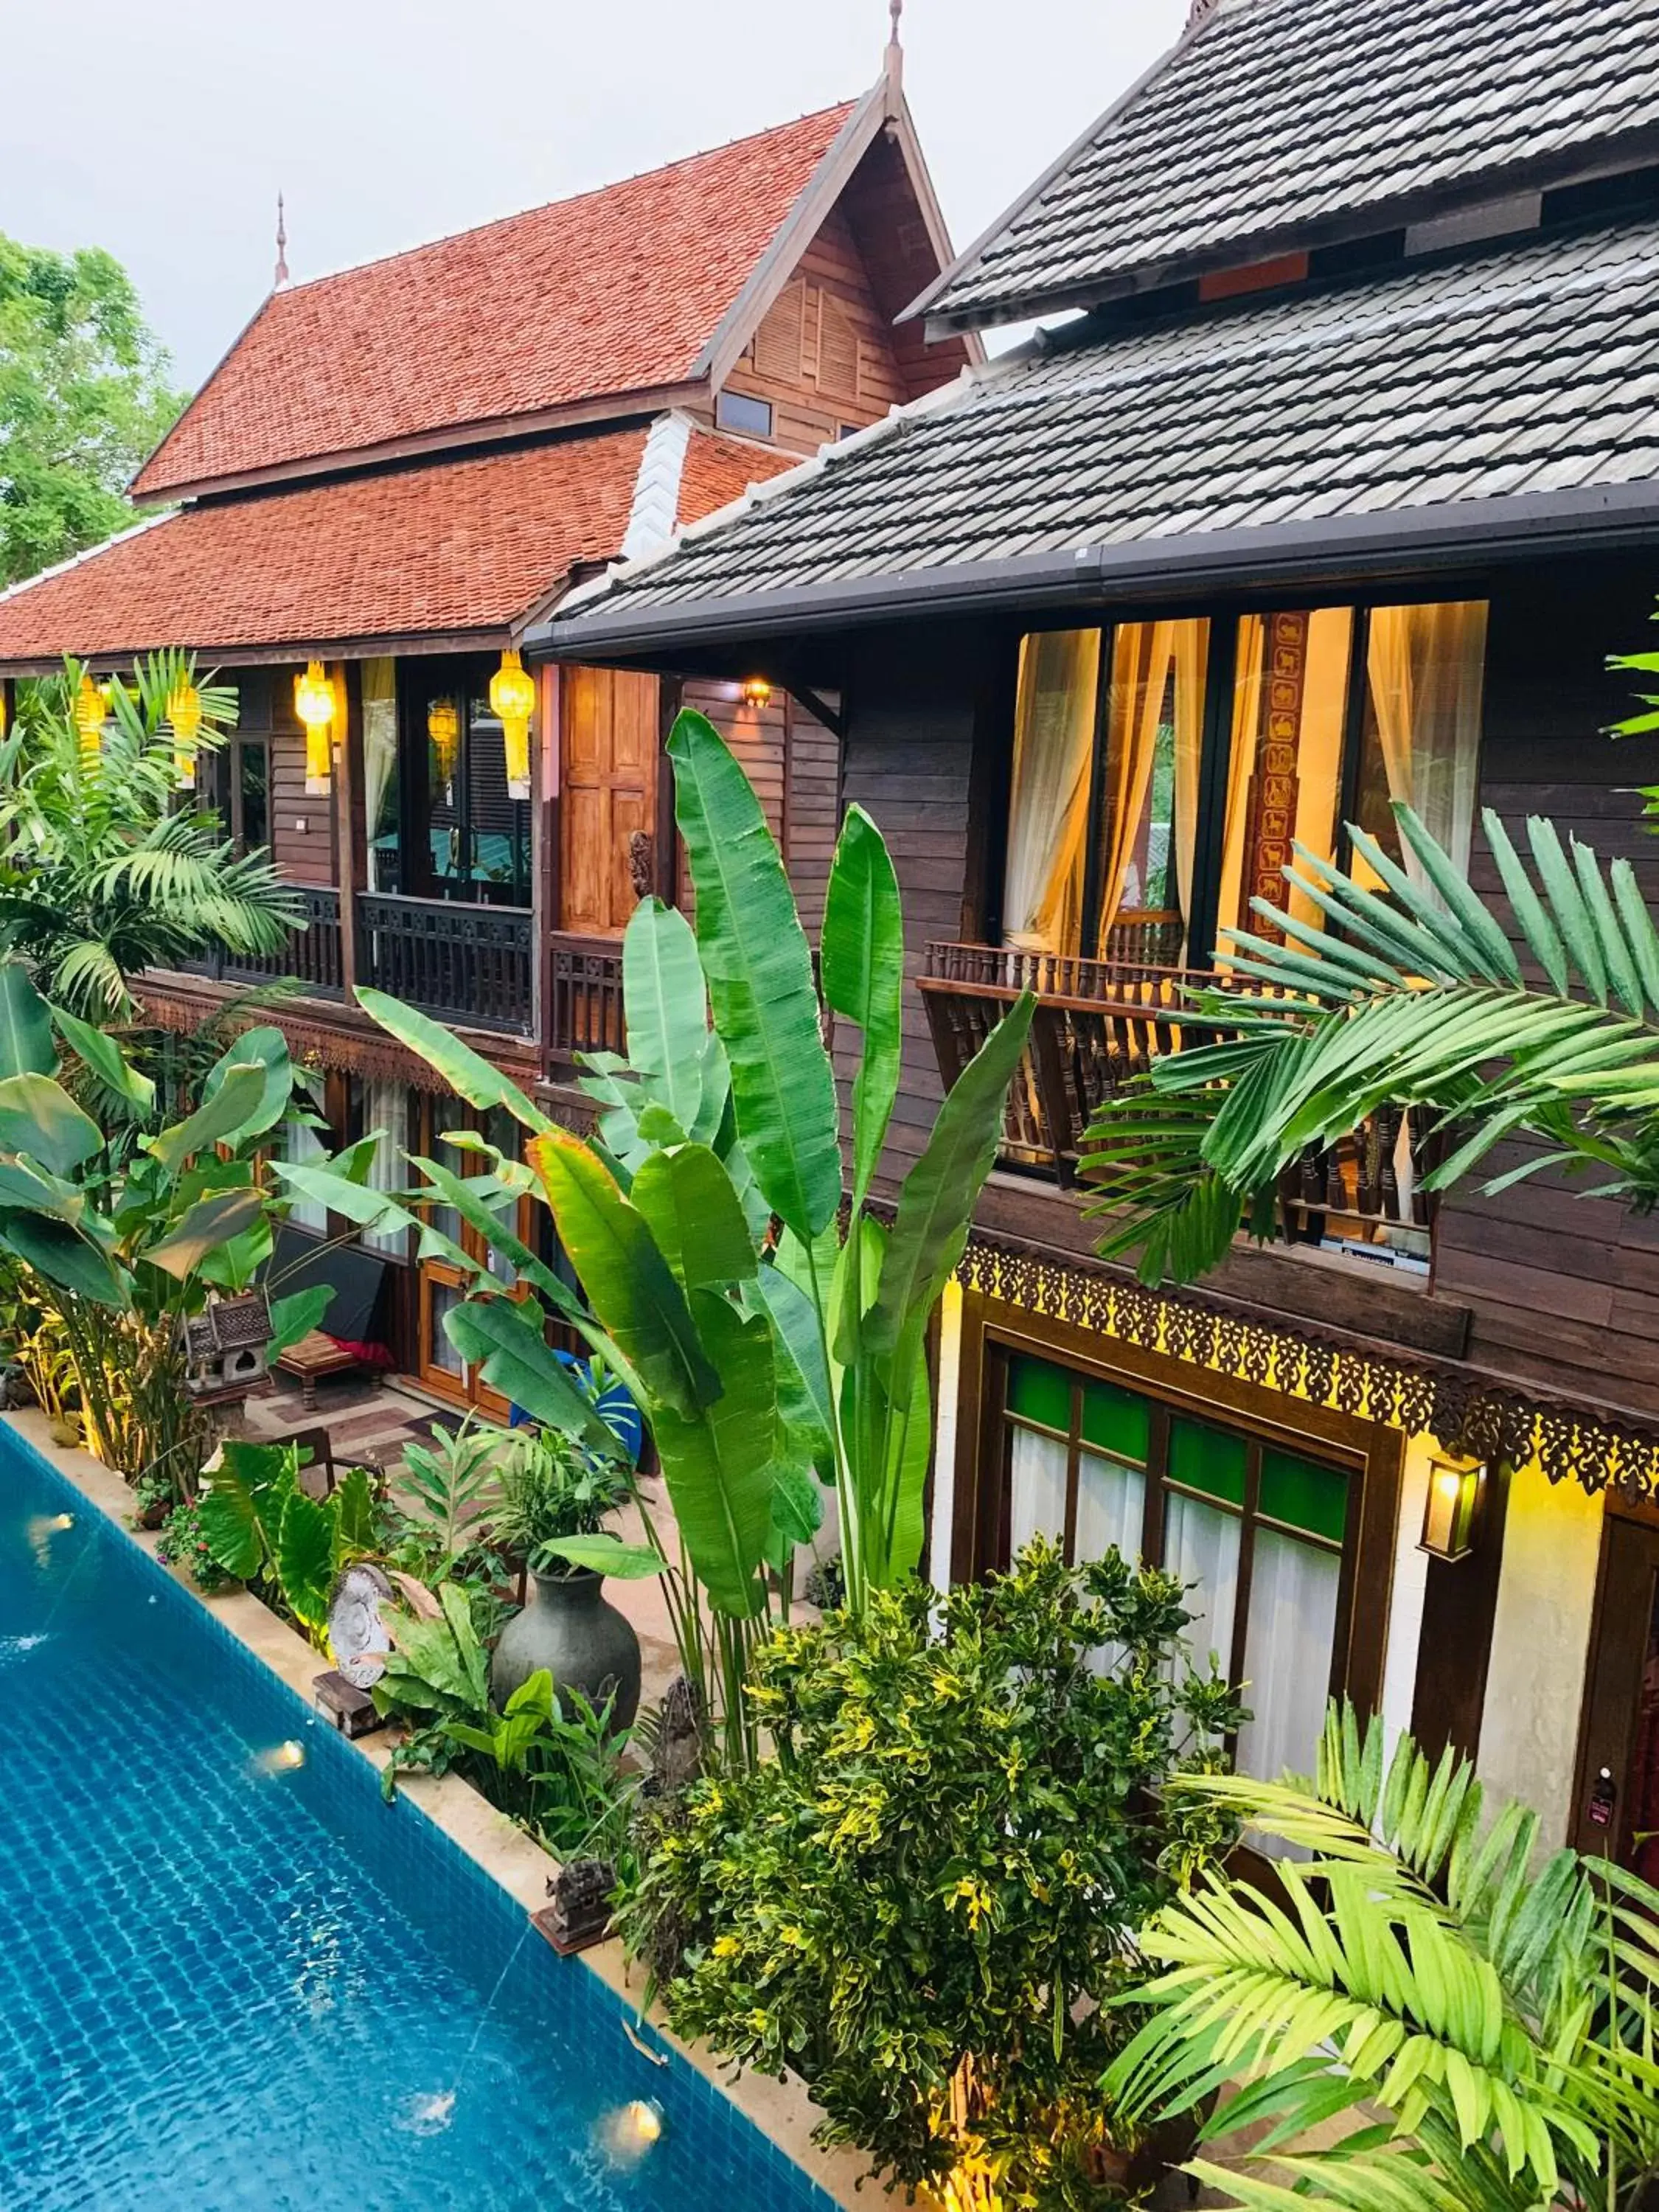 Property building, Pool View in Hongkhao Village